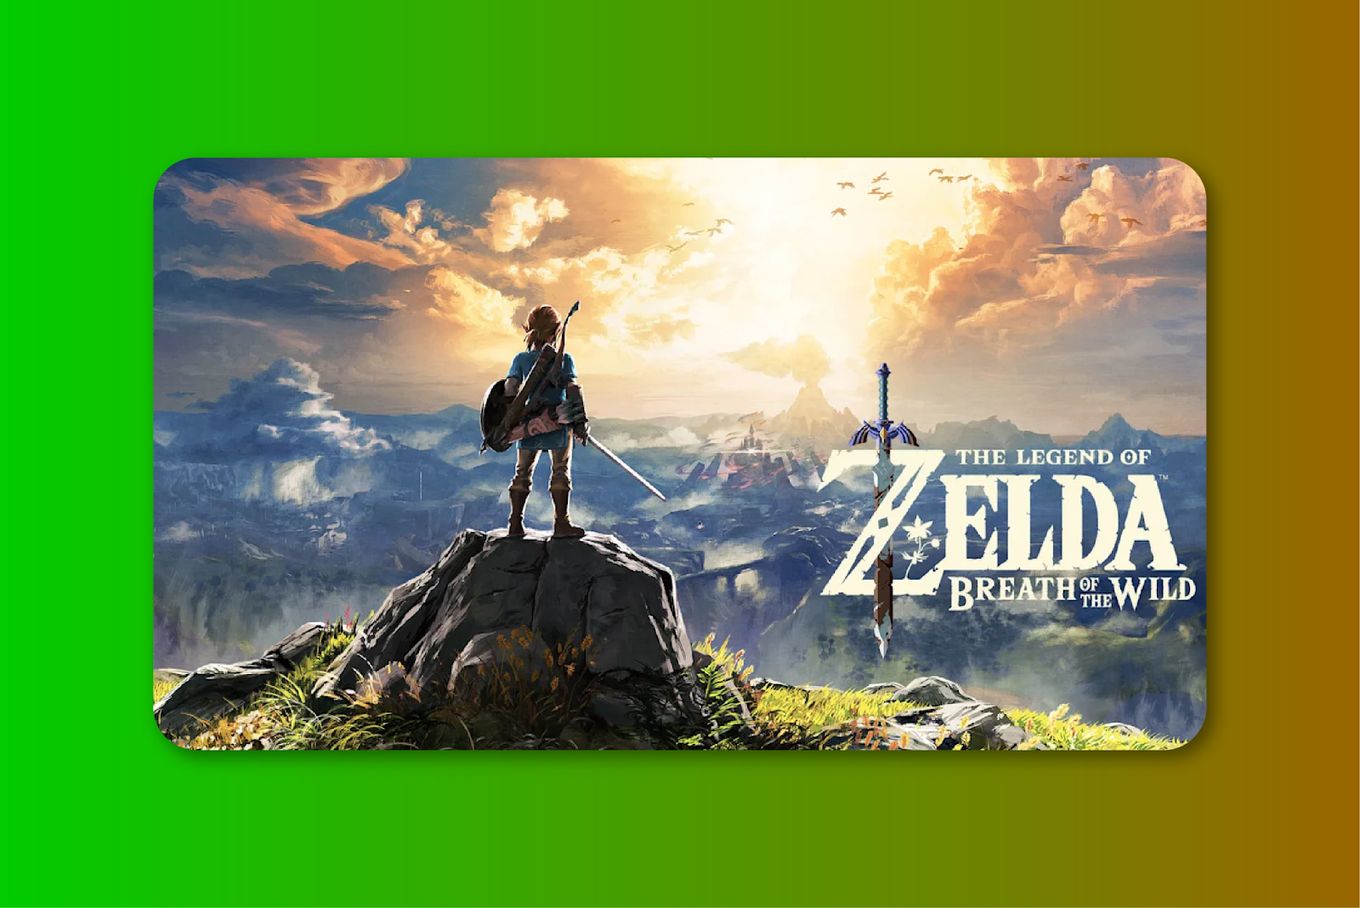 The Legend of Zelda Breath of the Wild VR Game for Nintendo Switch